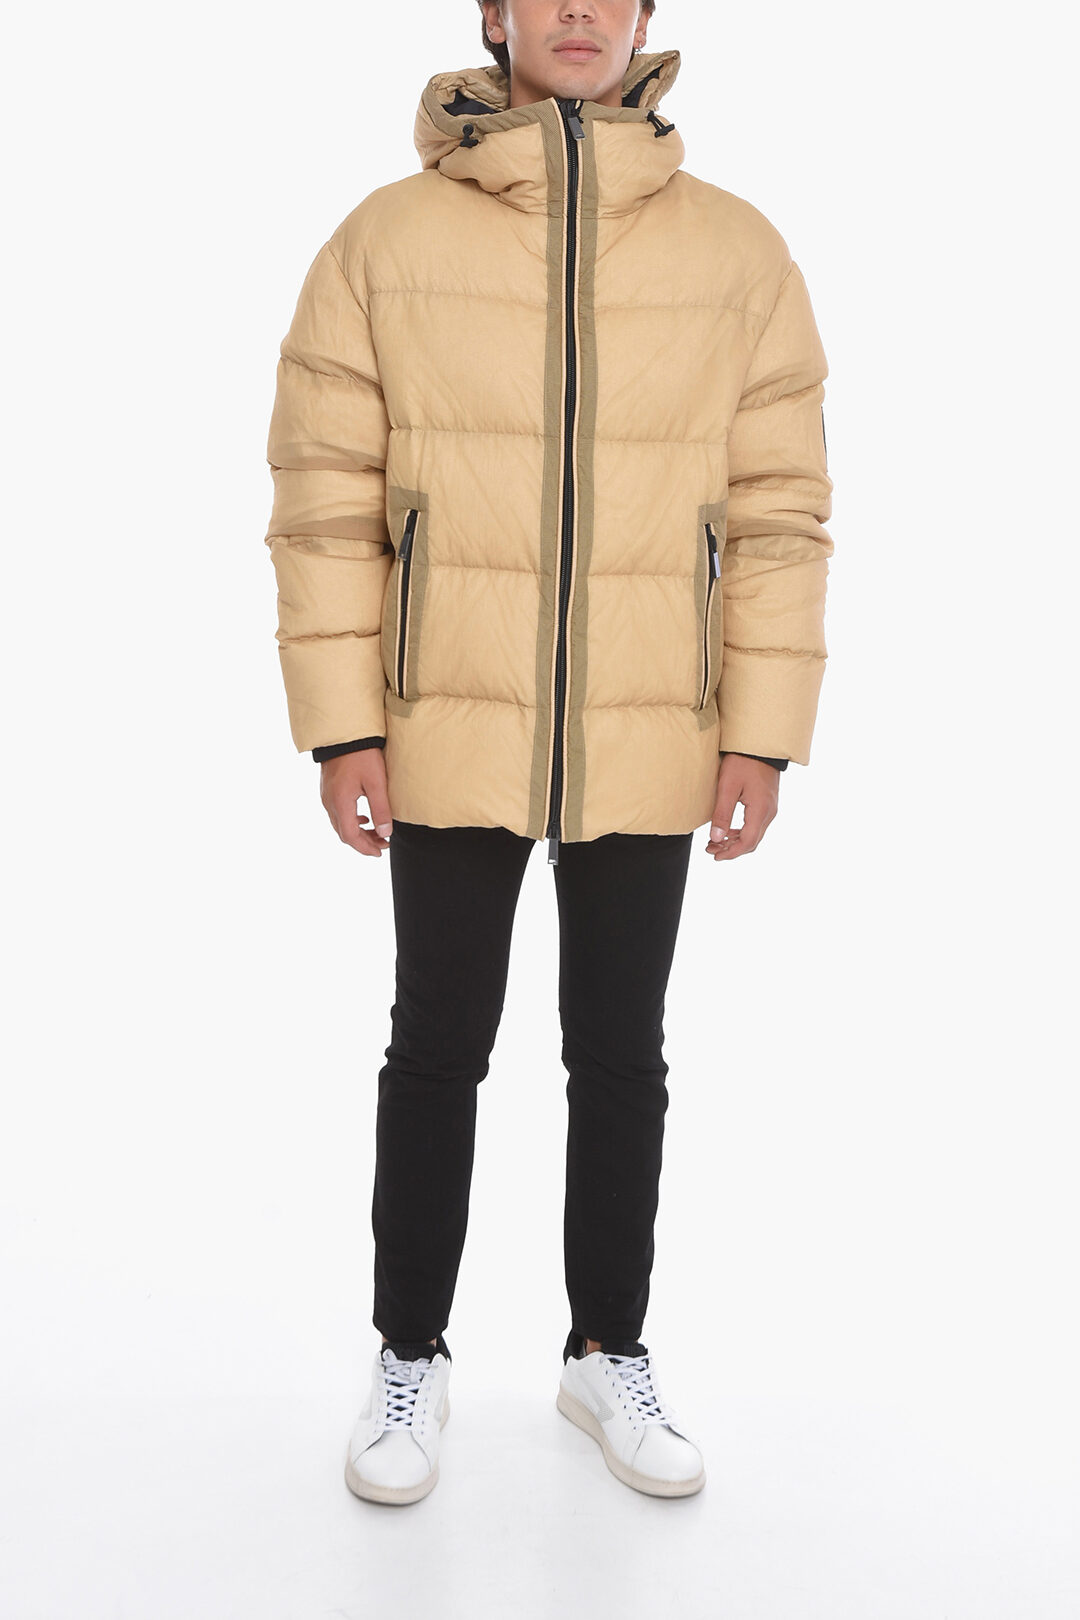 Dsquared2 Hooded Puffer Jacket With Drawstrings men - Glamood Outlet